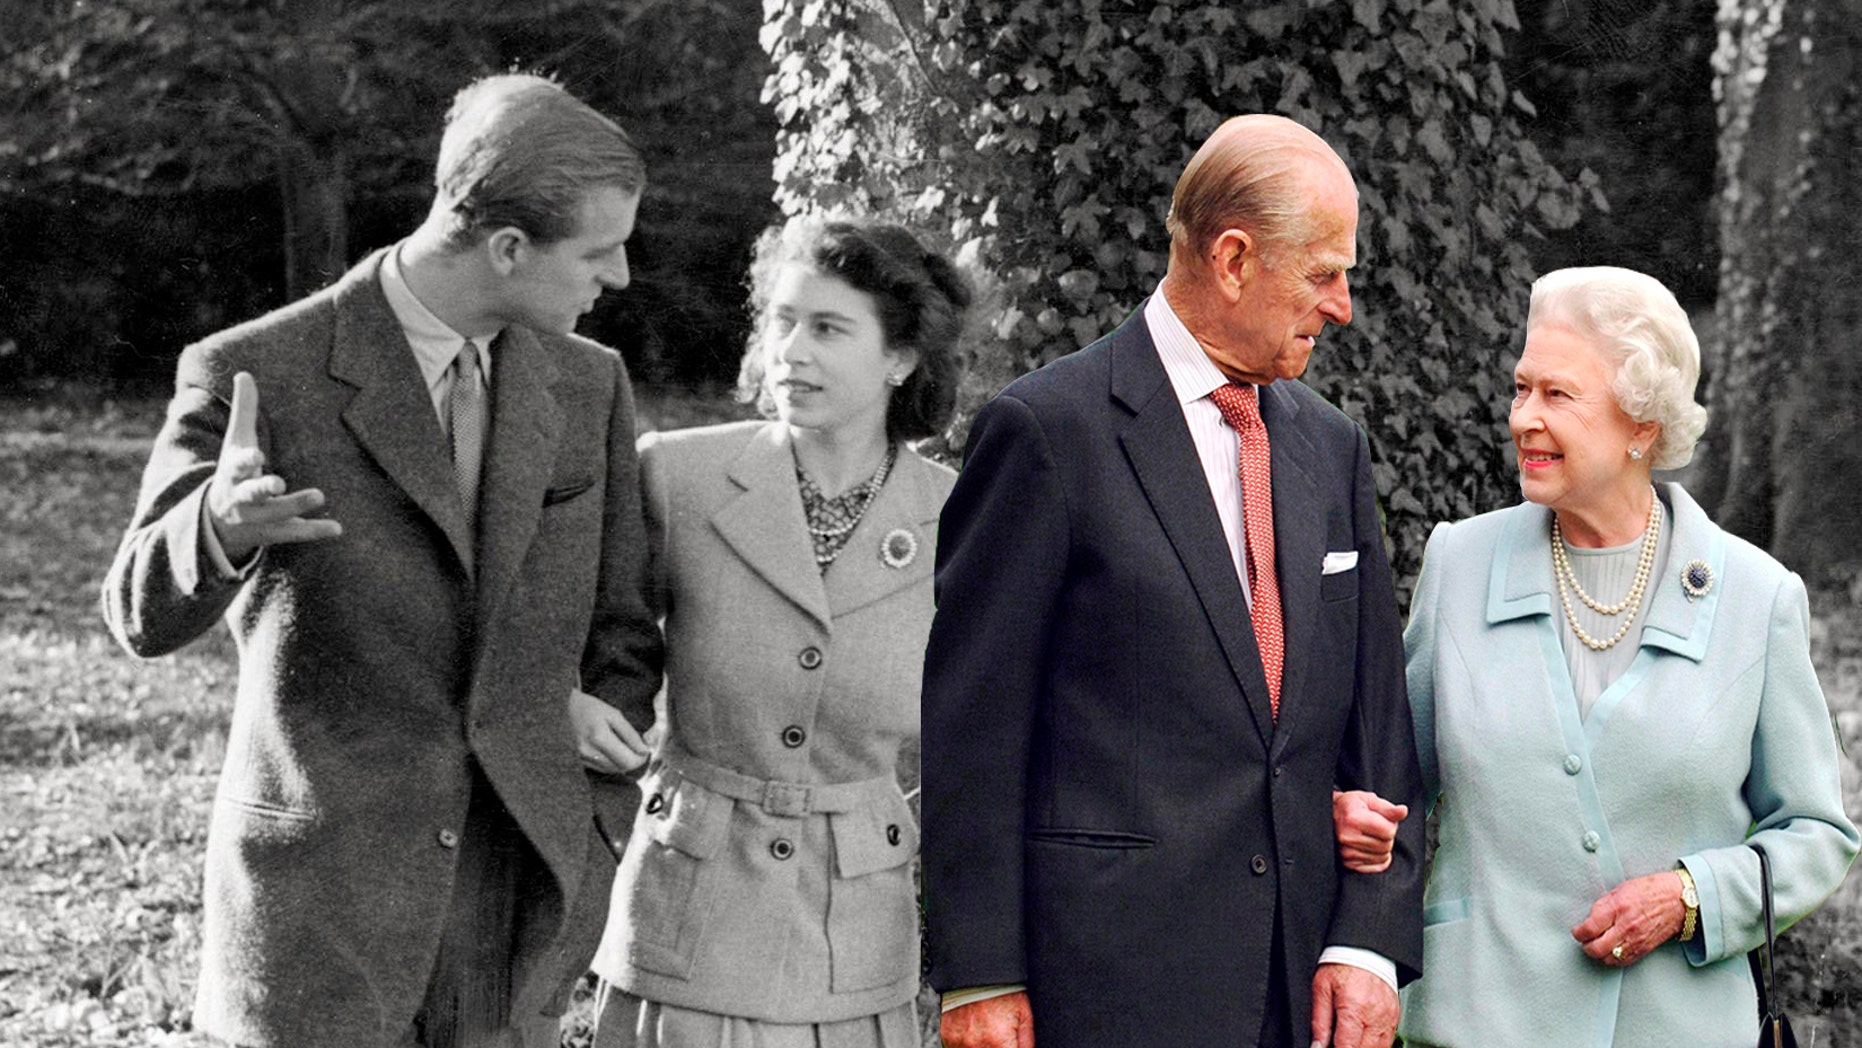 Queen Elizabeth’s lasting marriage to Prince Philip haunted by rumored affair with showgirl, book claims